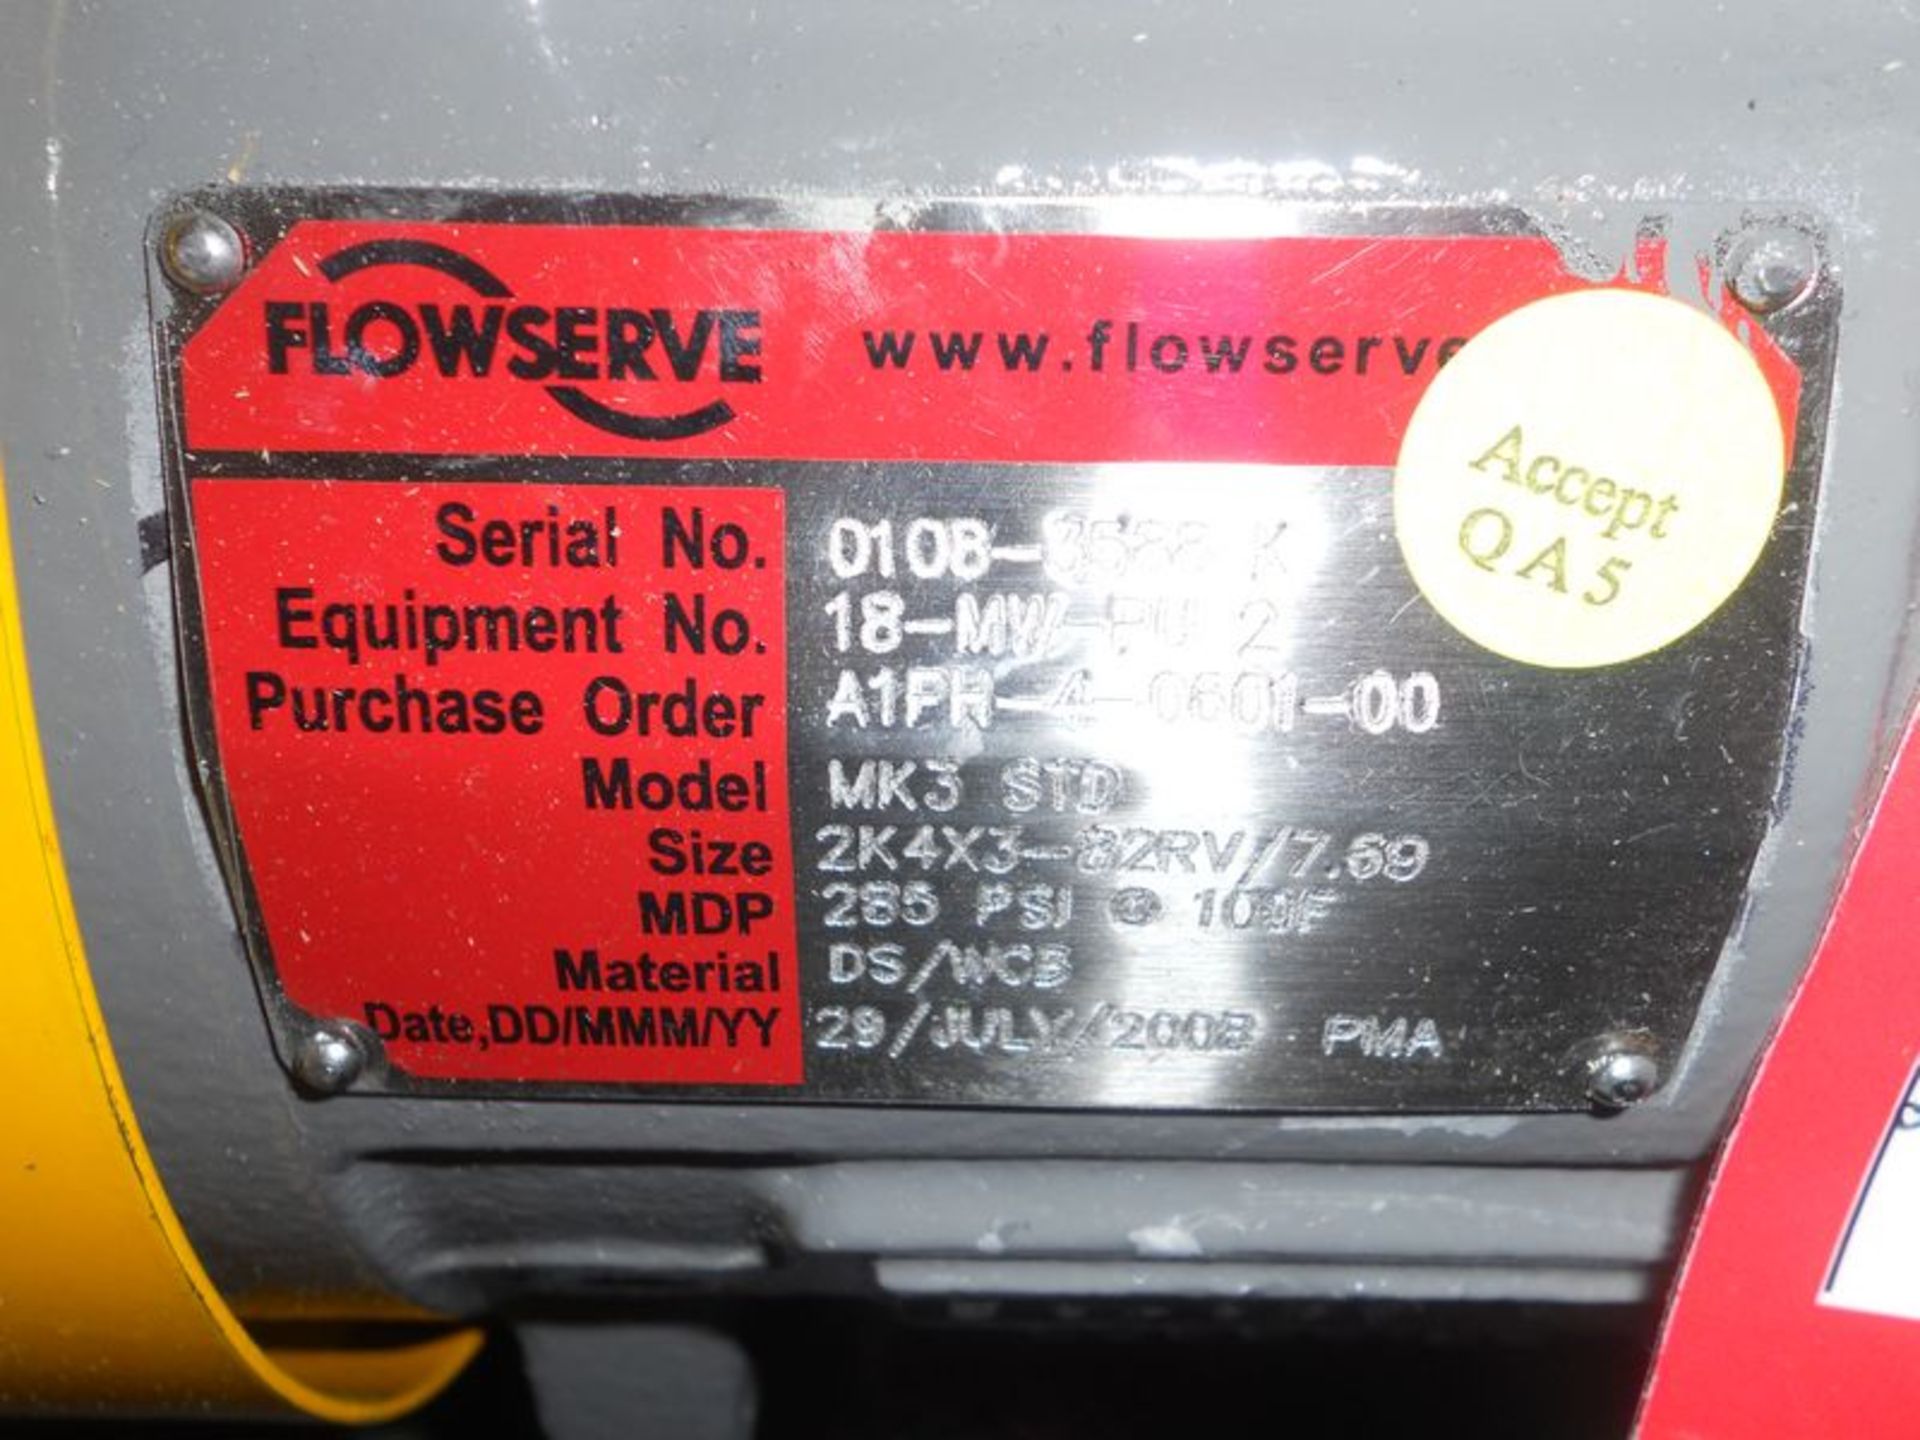 FlowServe MK3 STD centrifugal pump, S/N 0108-3590-E, 4" X 3", 60 HP, MDP 285 psi @ 100 DegF, Size - Image 5 of 6